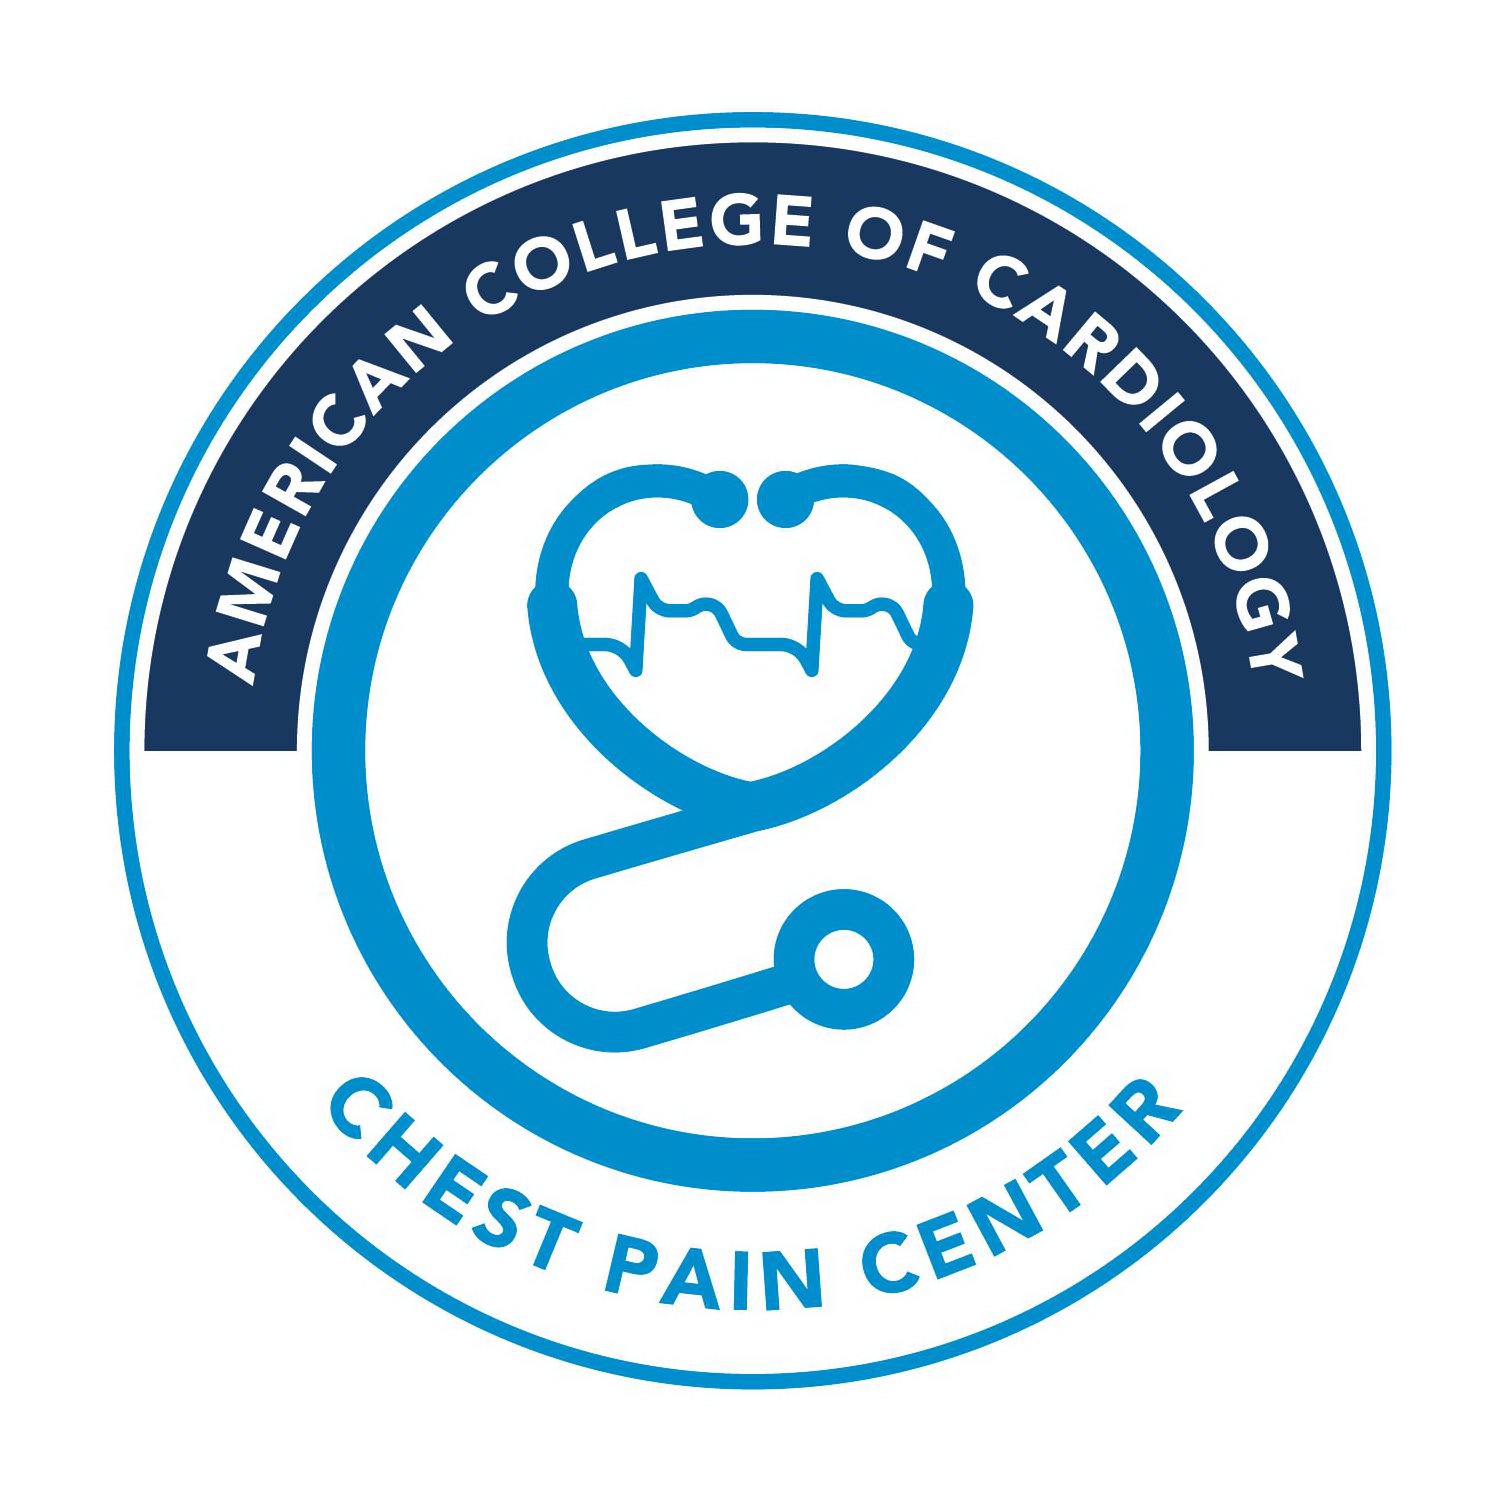  AMERICAN COLLEGE OF CARDIOLOGY CHEST PAIN CENTER